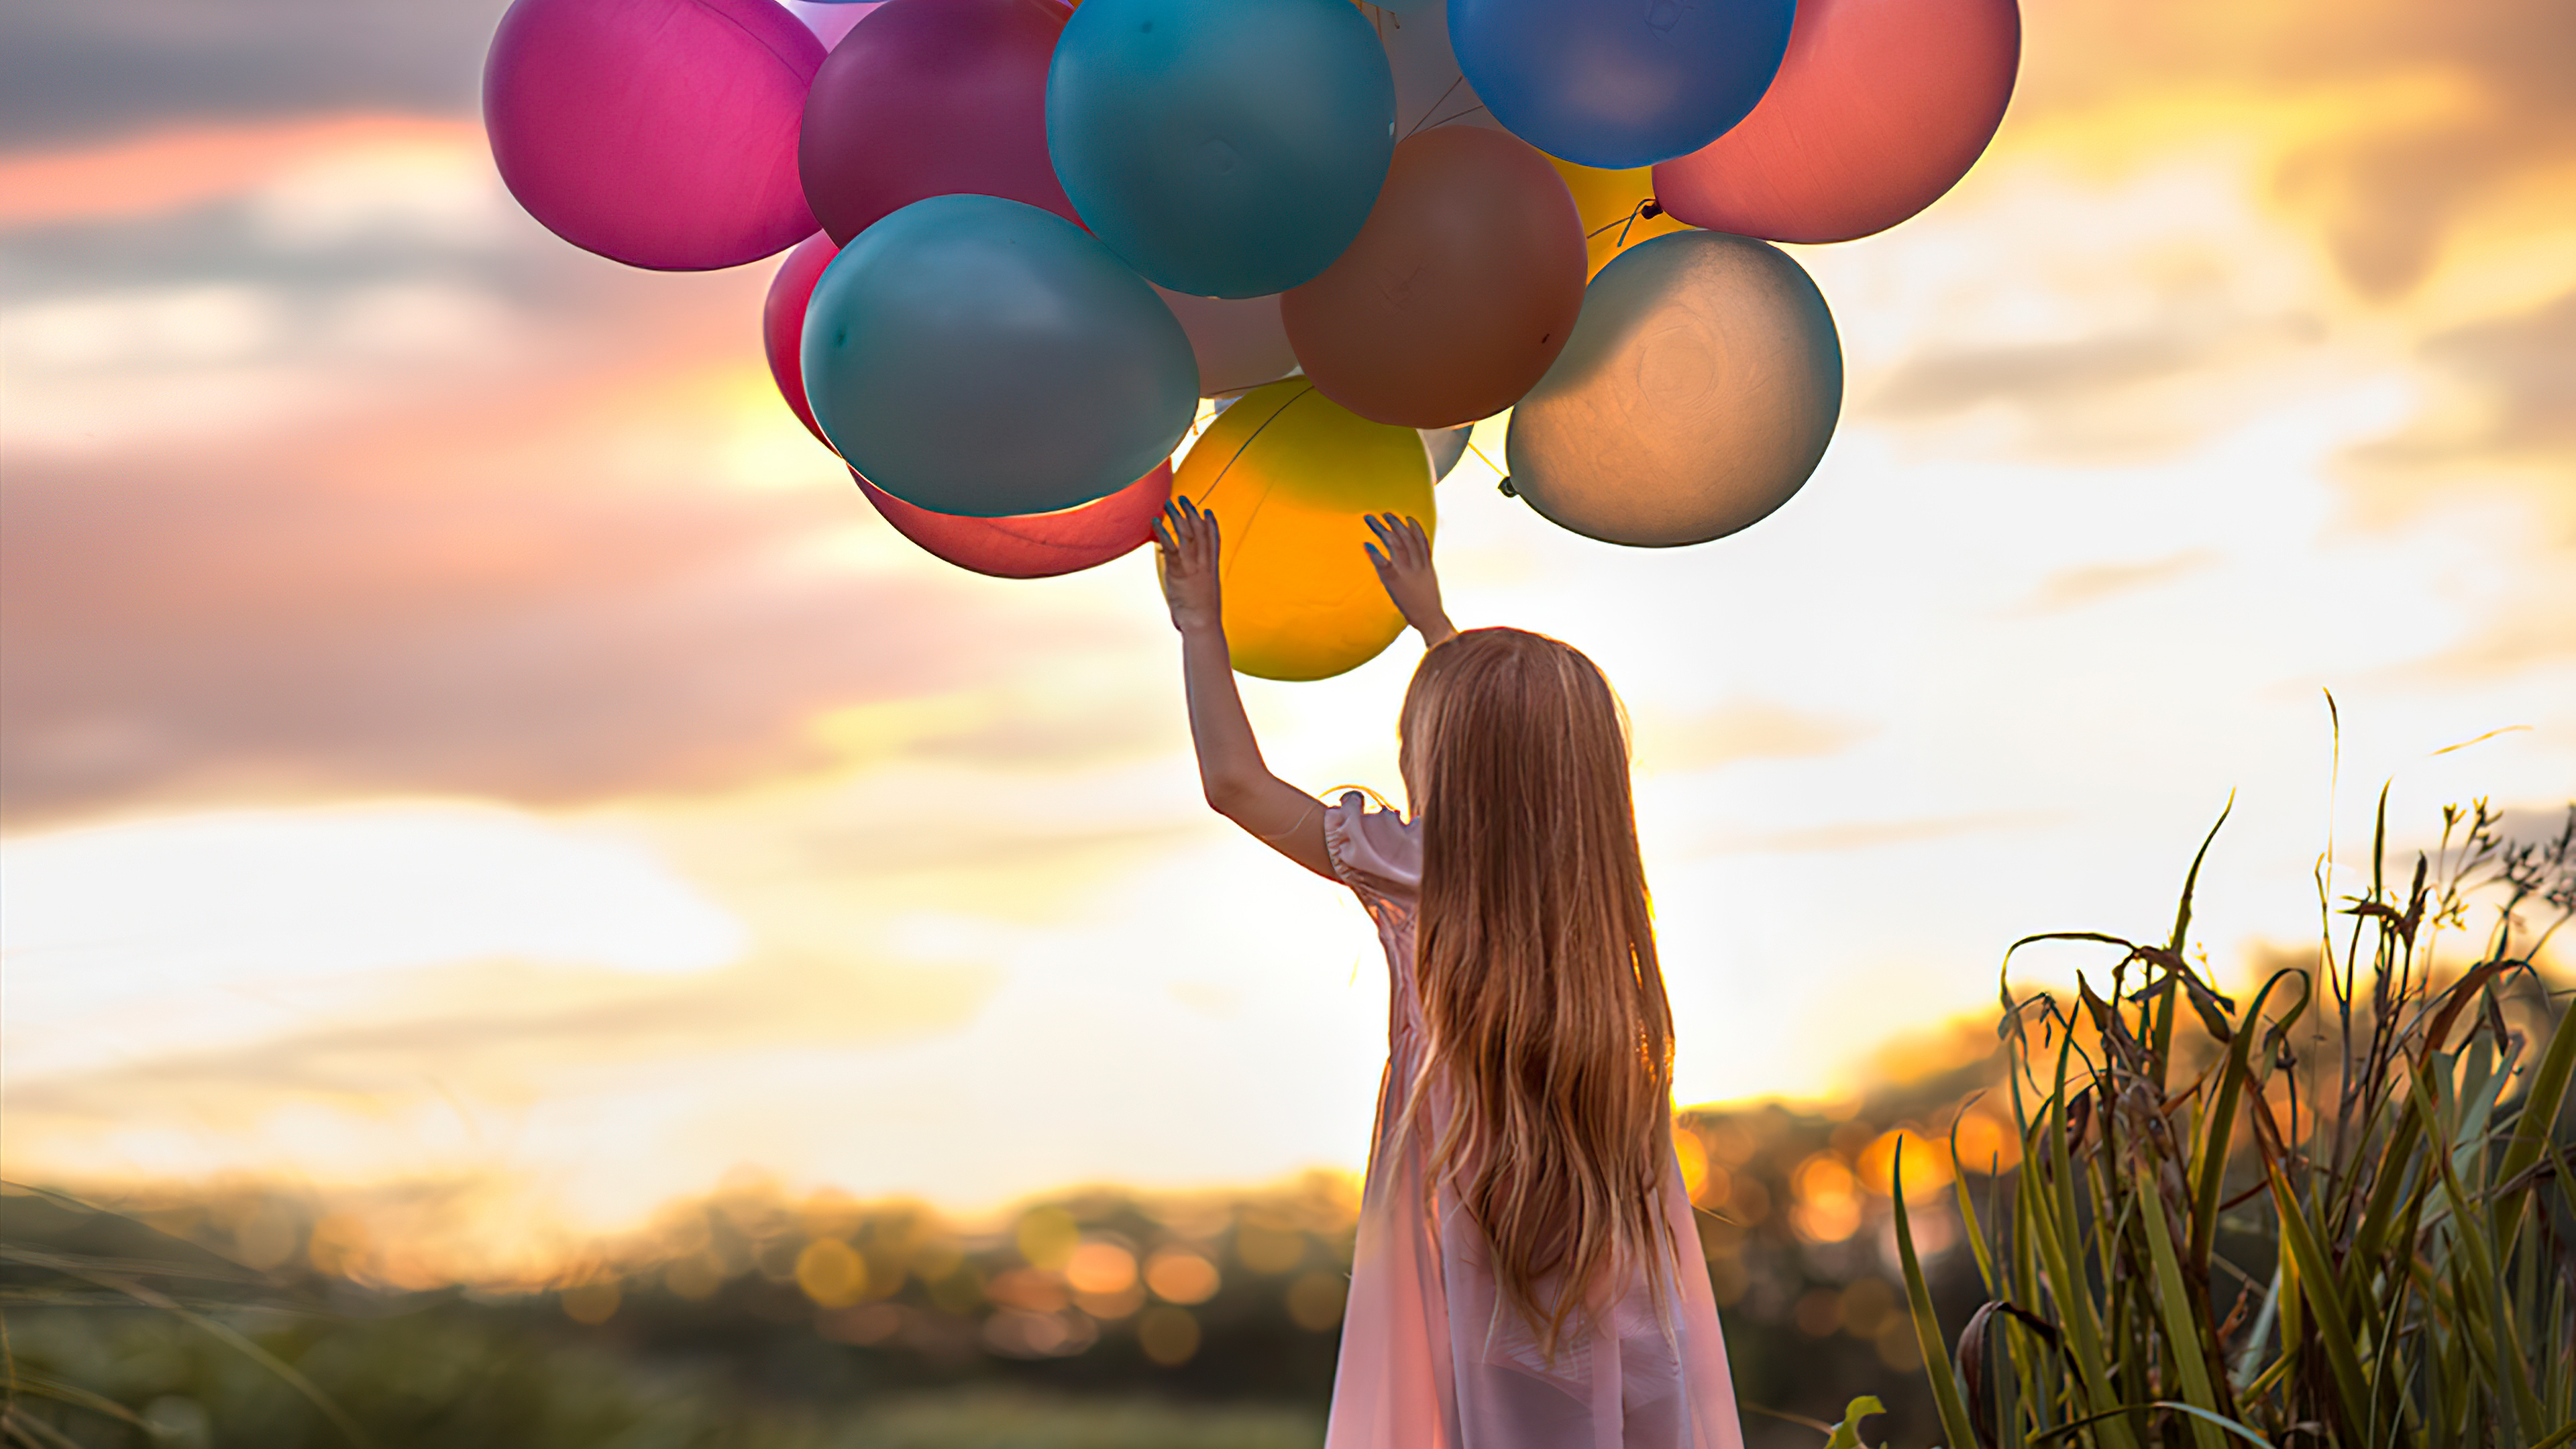 Little Girl With Colorful Balloons Is Wearing Pink Dress K HD